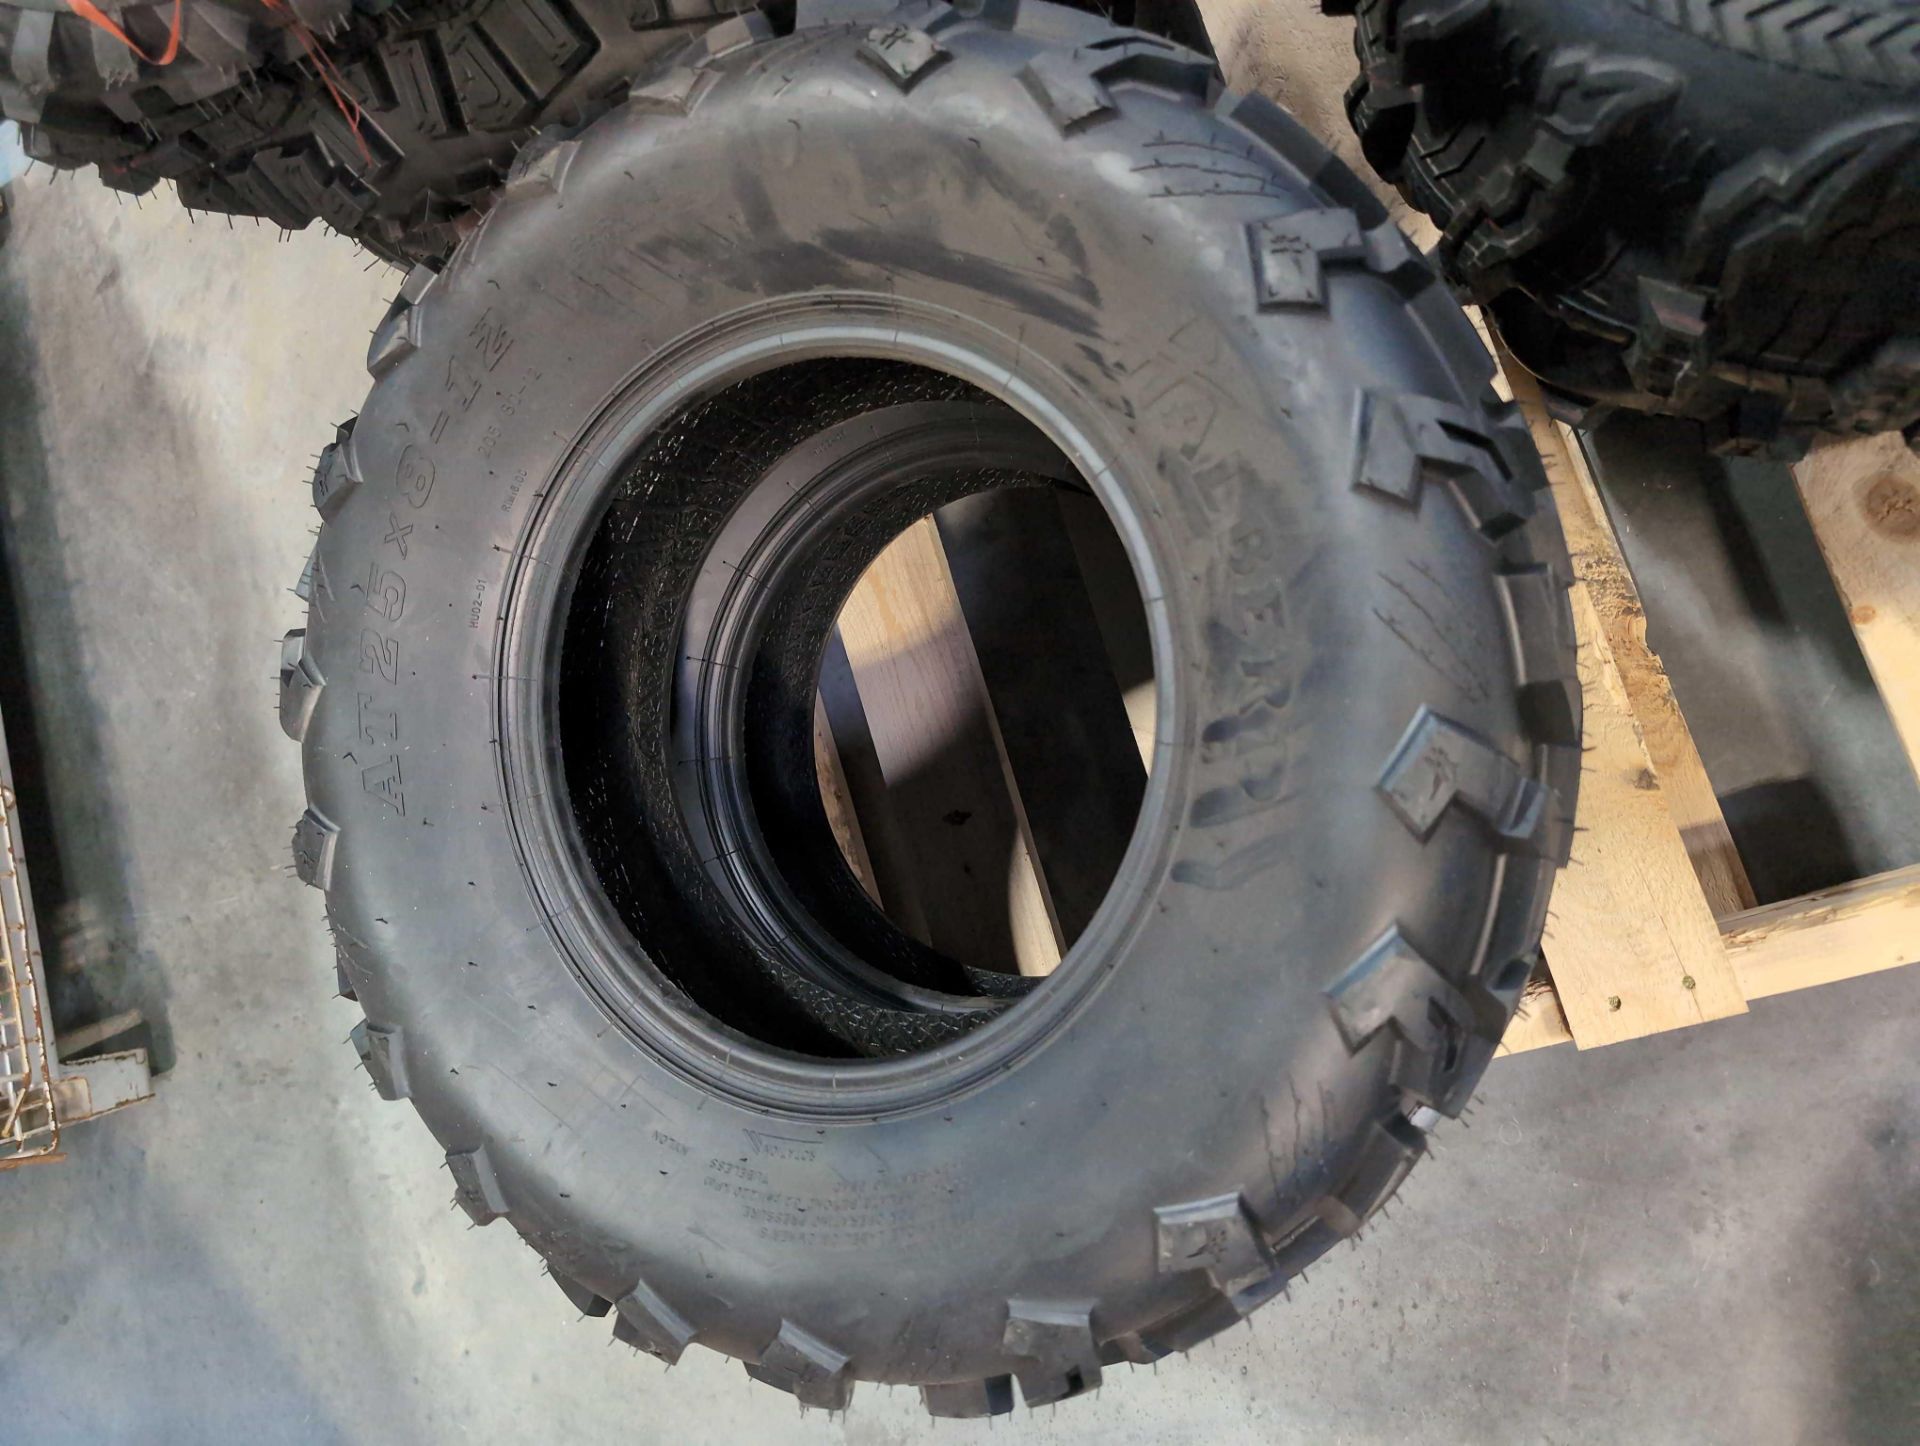 Tires: Bear Claw EX AT2 2x11-10, Halber AT25x8-12 and MASSFX AT 23x11-10 - Image 4 of 8